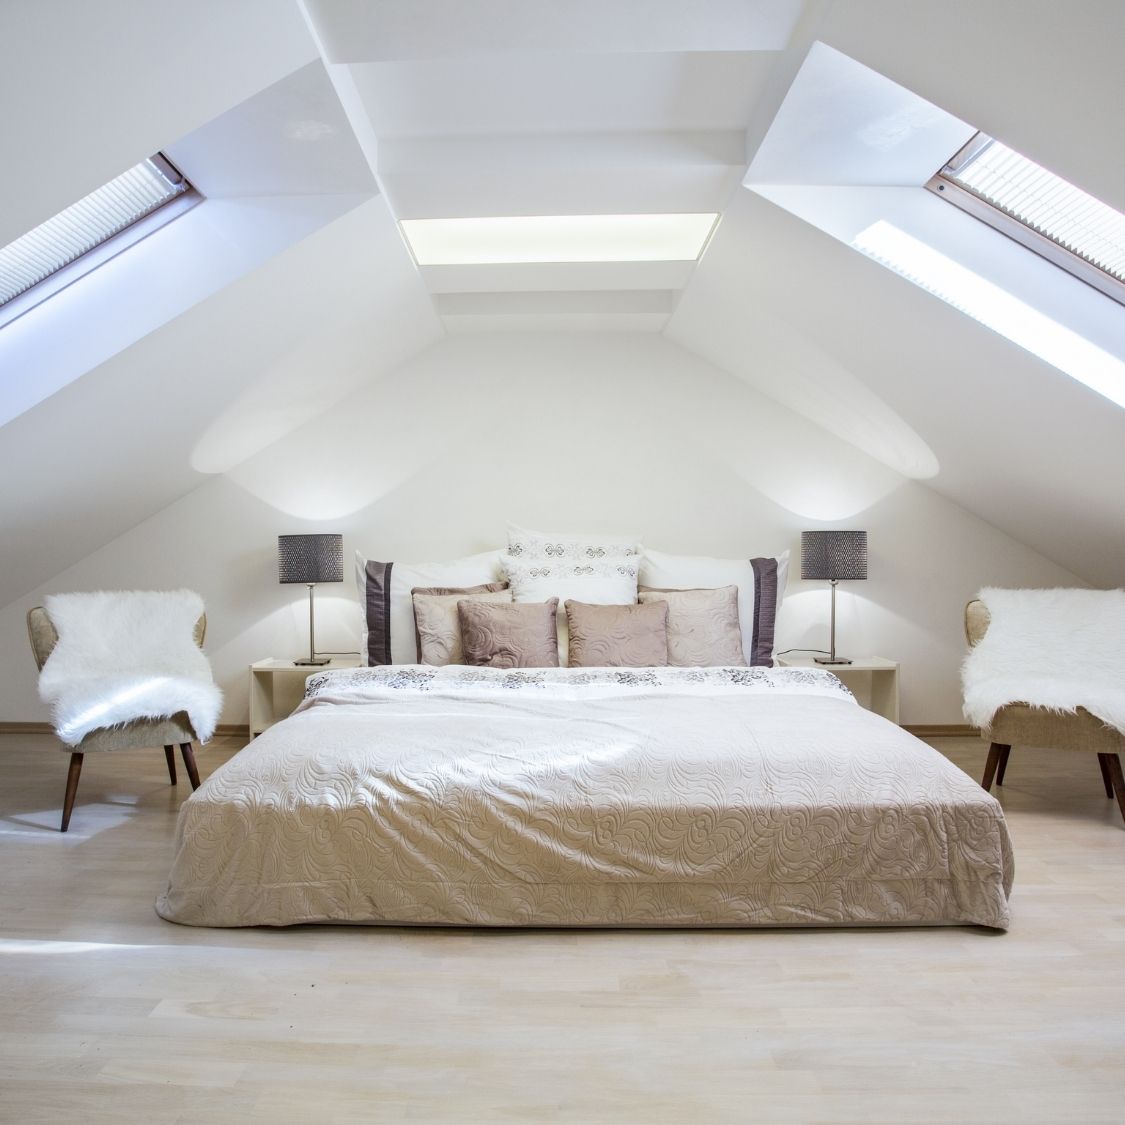 How To Finish an Attic: Important Tips for a Smooth Project